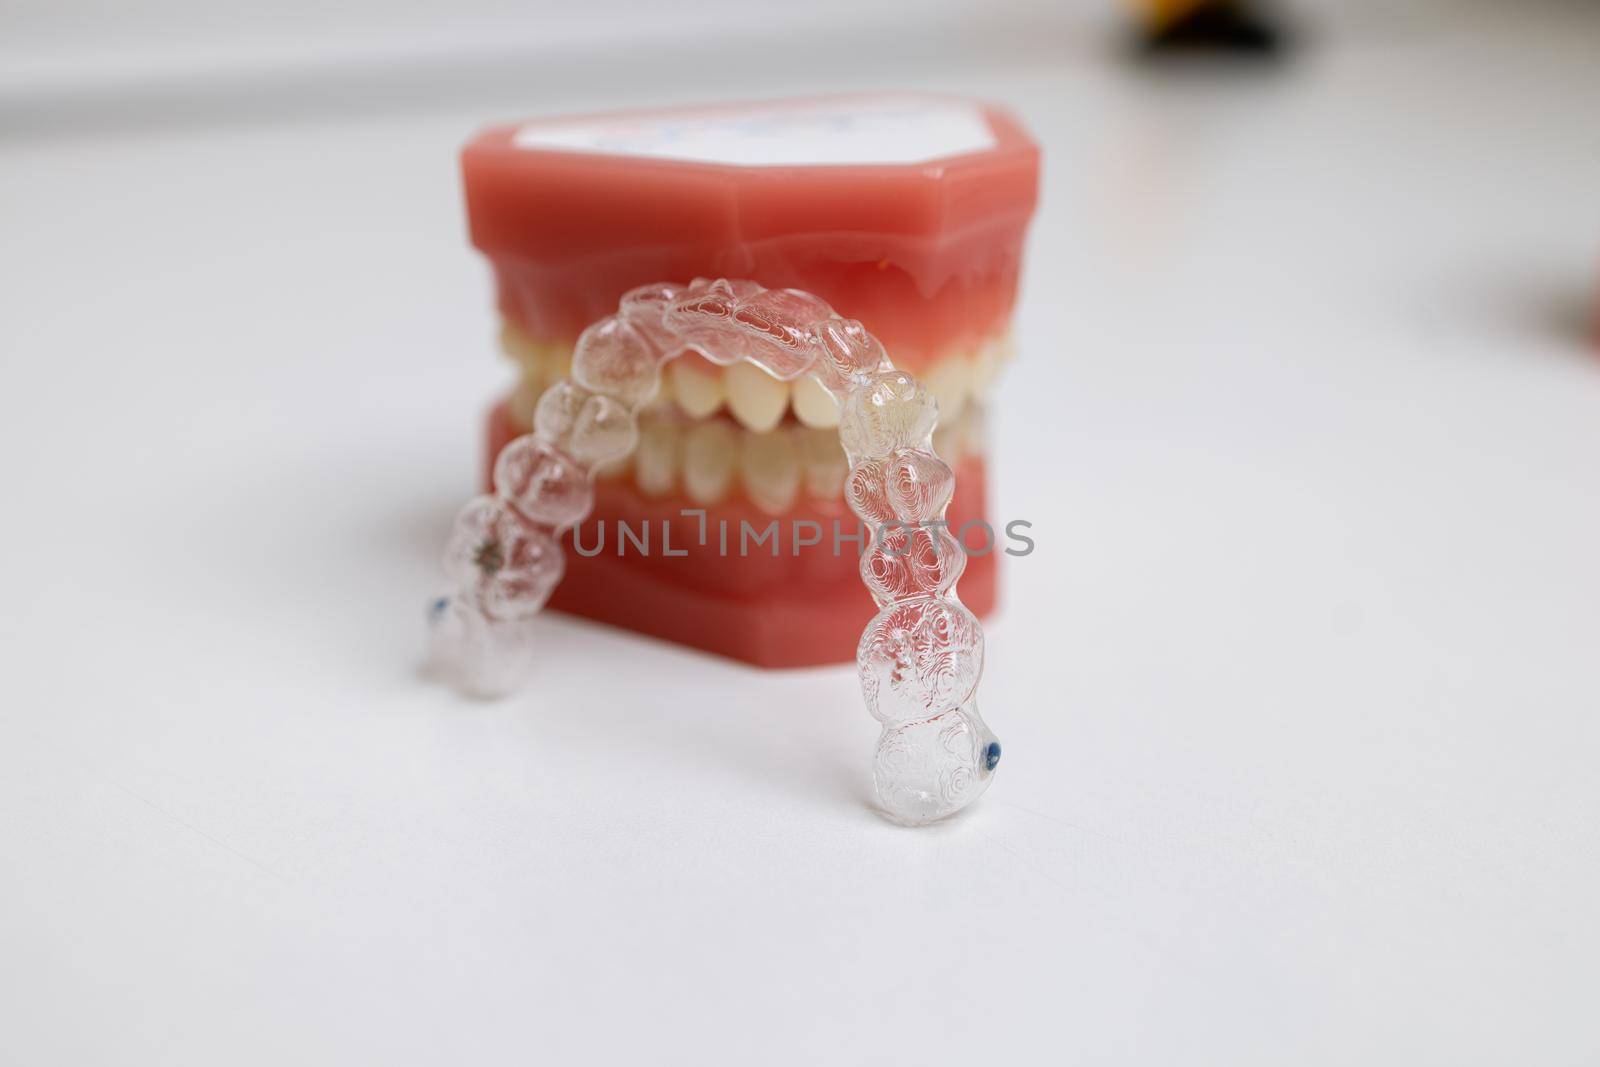 mouth guard and models of teeth on a jaw. High quality photo